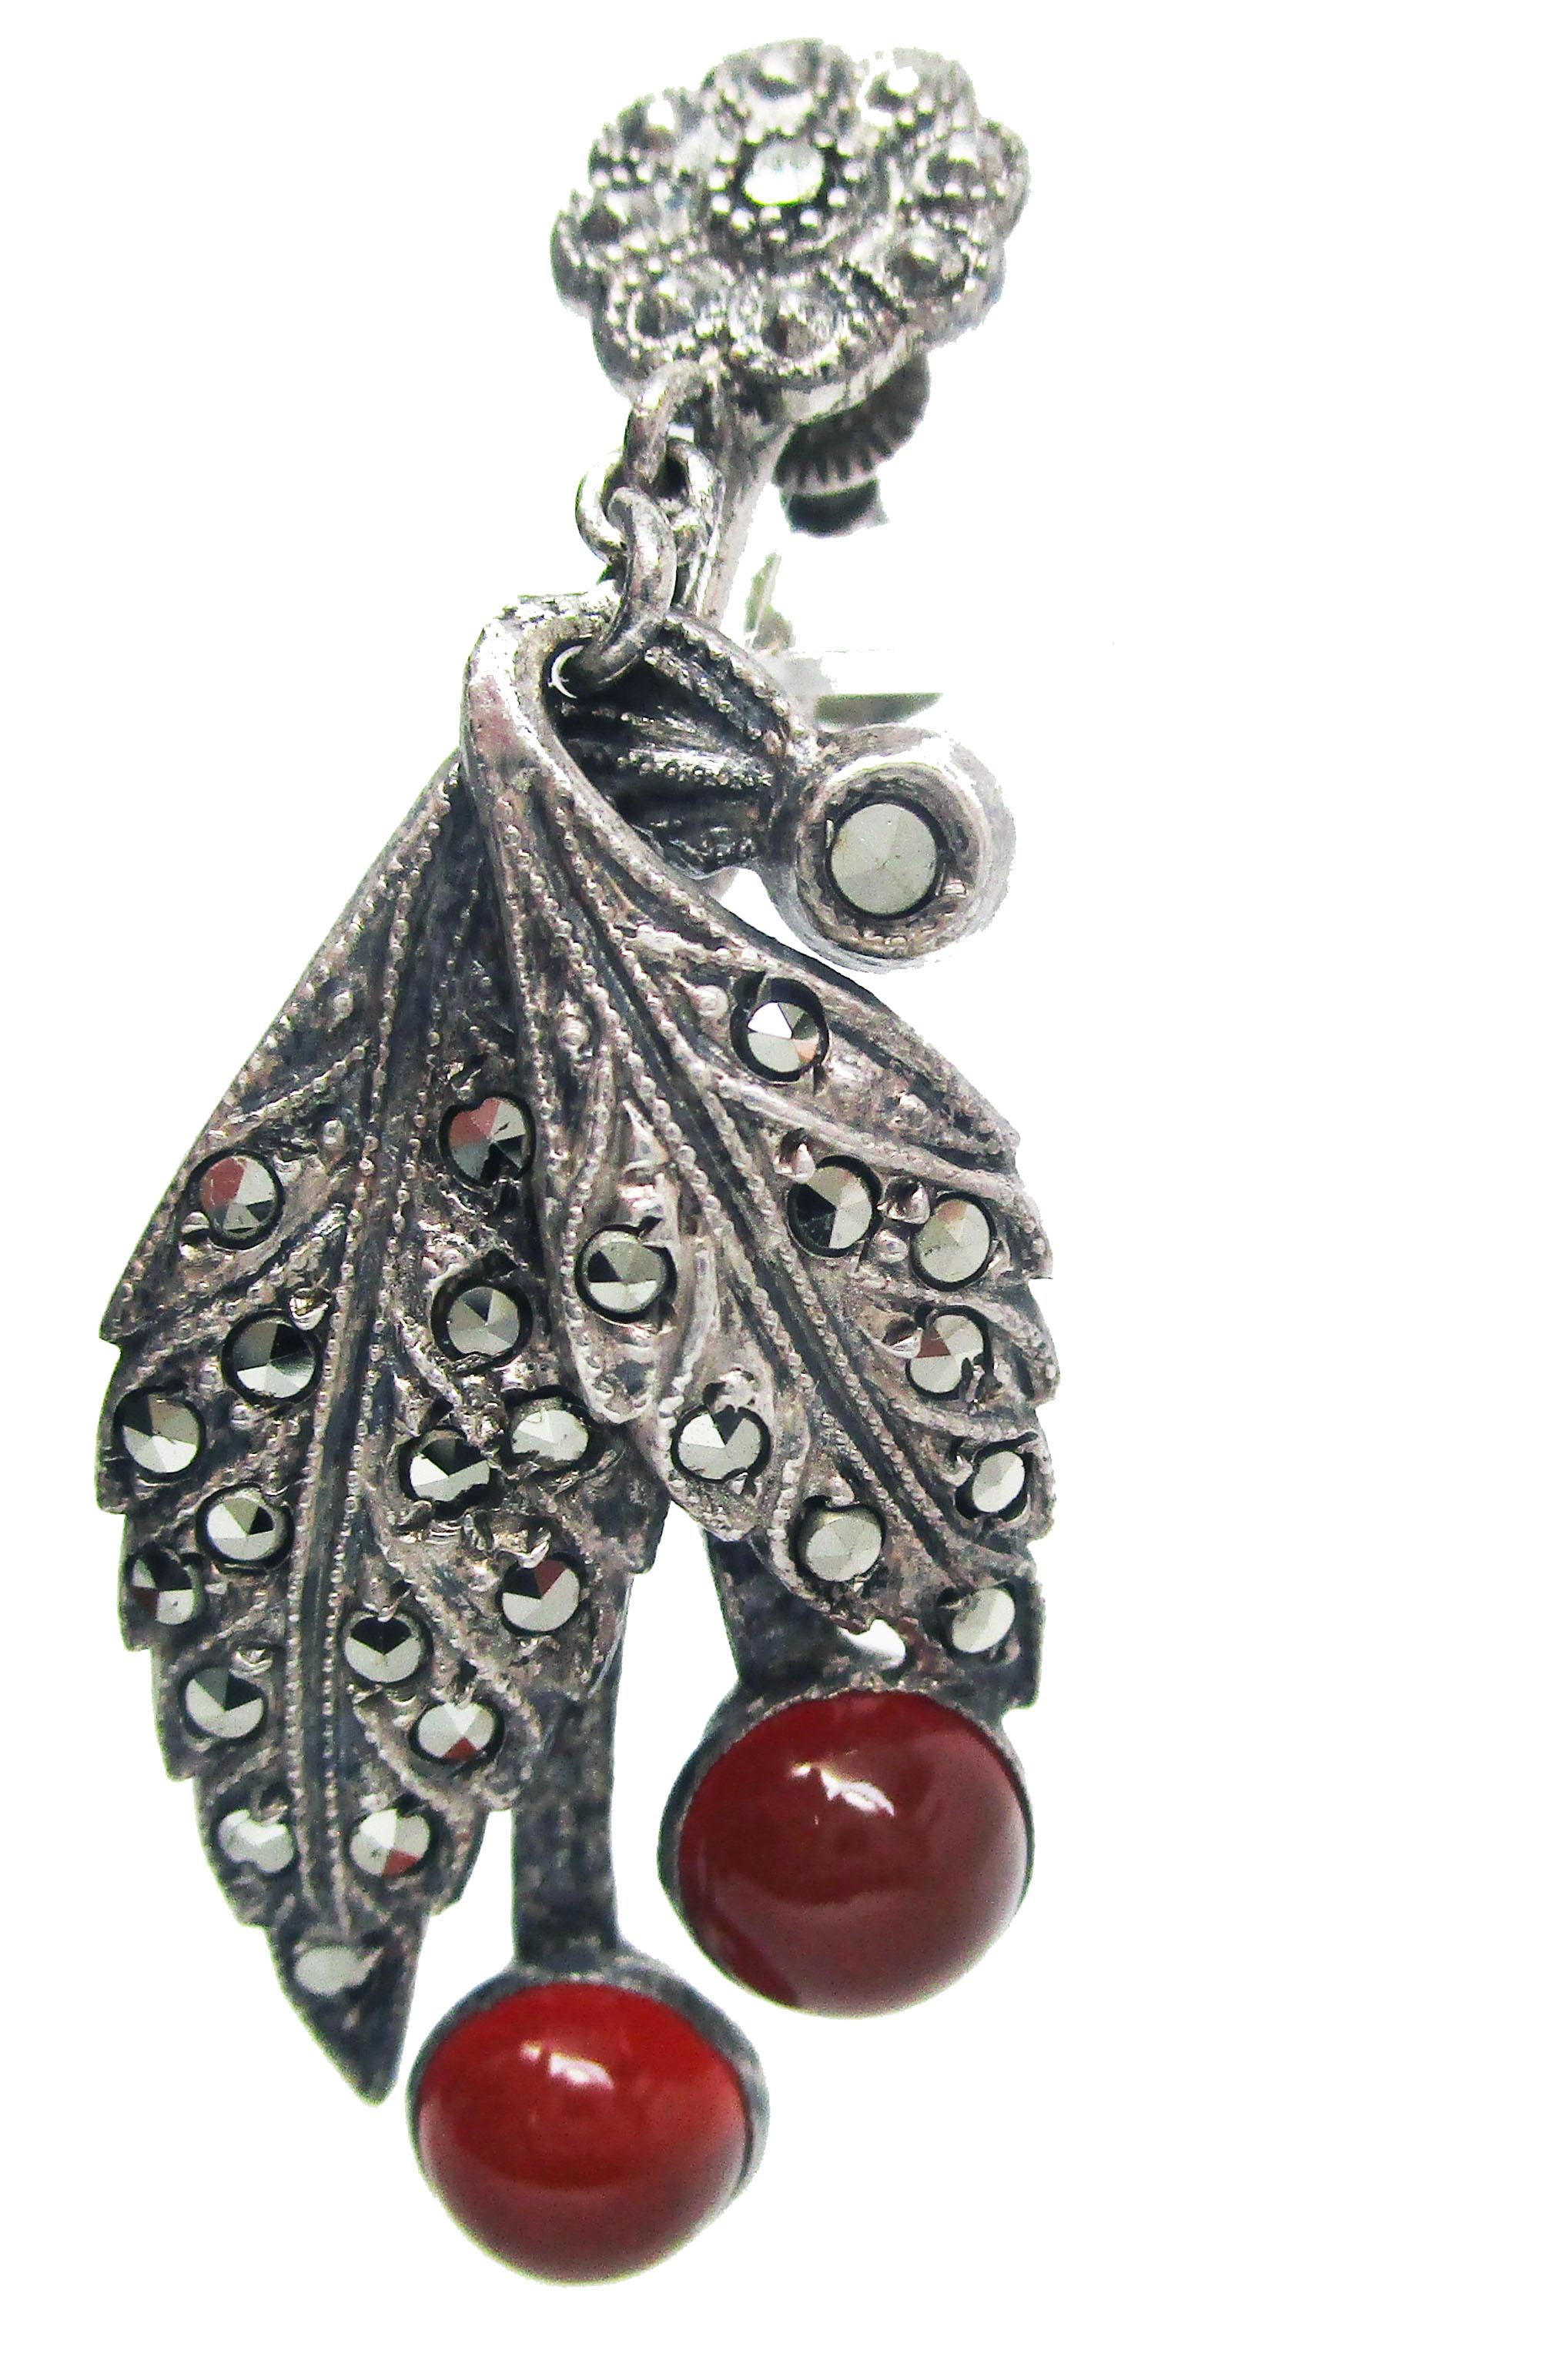 This is a fantastic pair of original Art Deco earrings in sterling silver featuring bright marcasite and rich, amber-hued carnelian! The Art Deco influence is clear in the dramatic lines and intense color contrast of these earrings. The sterling